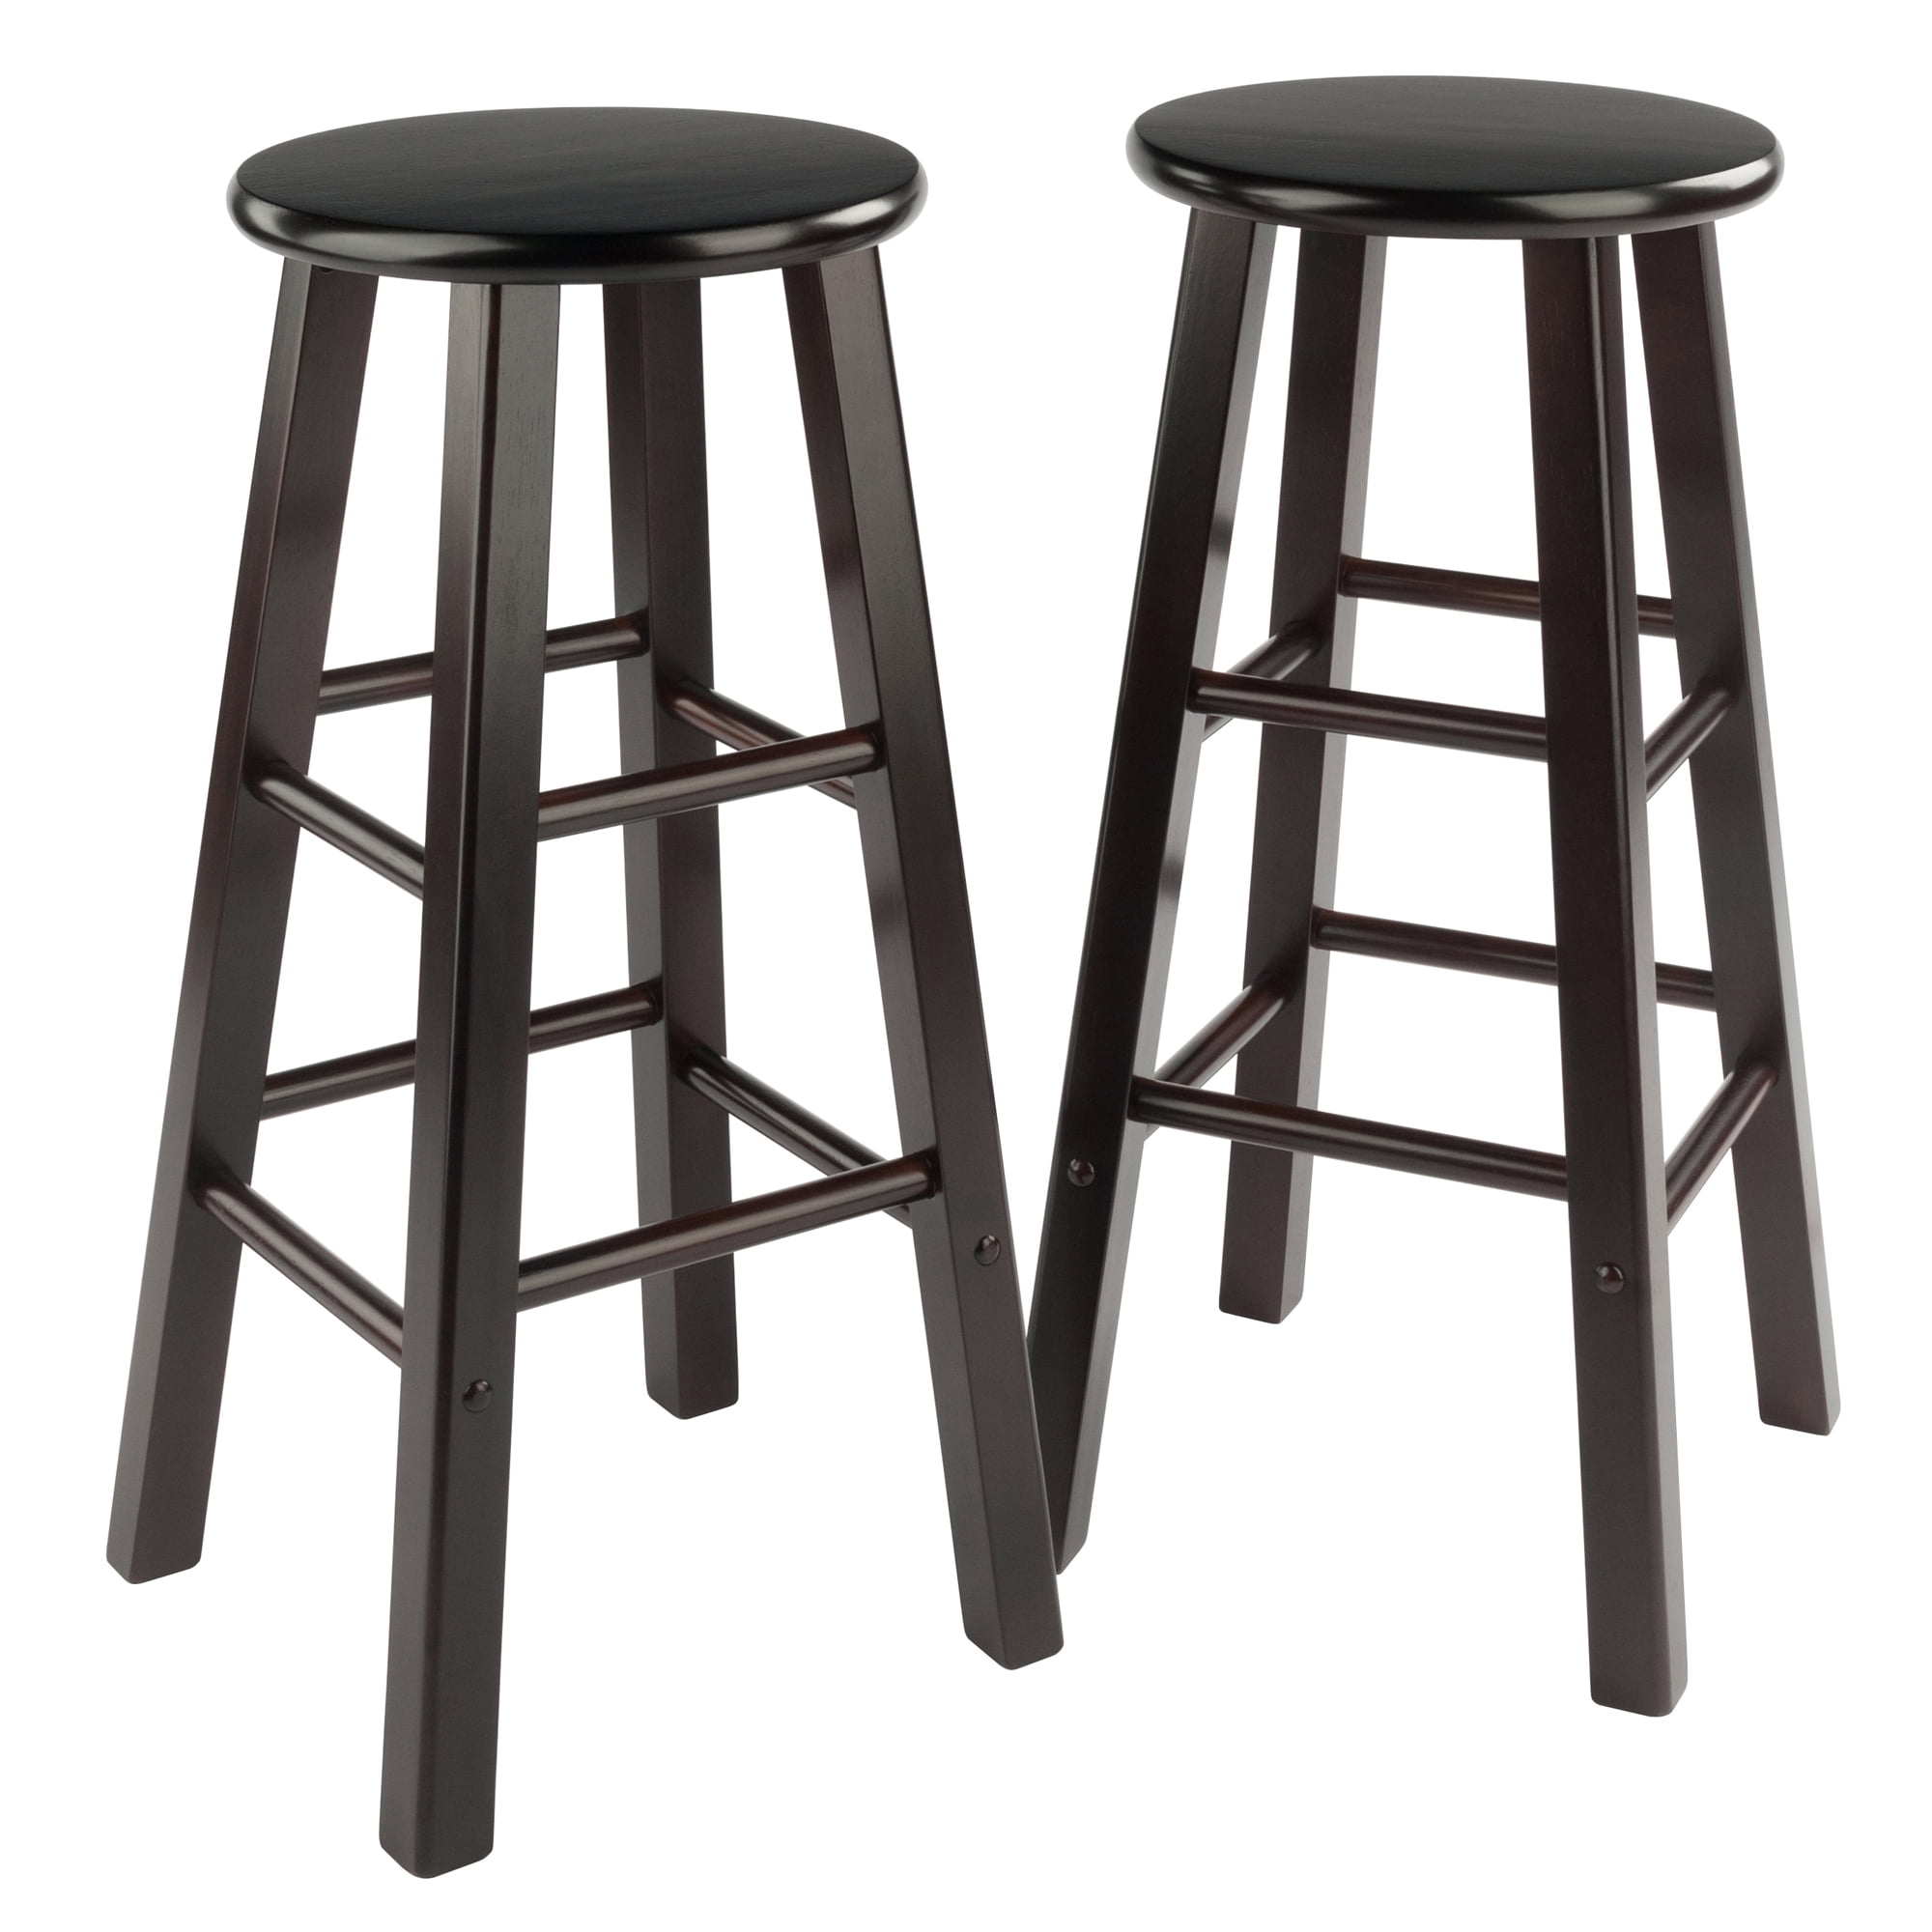 30 Inches Stool Beveled Seat Set of 2 Assembled 